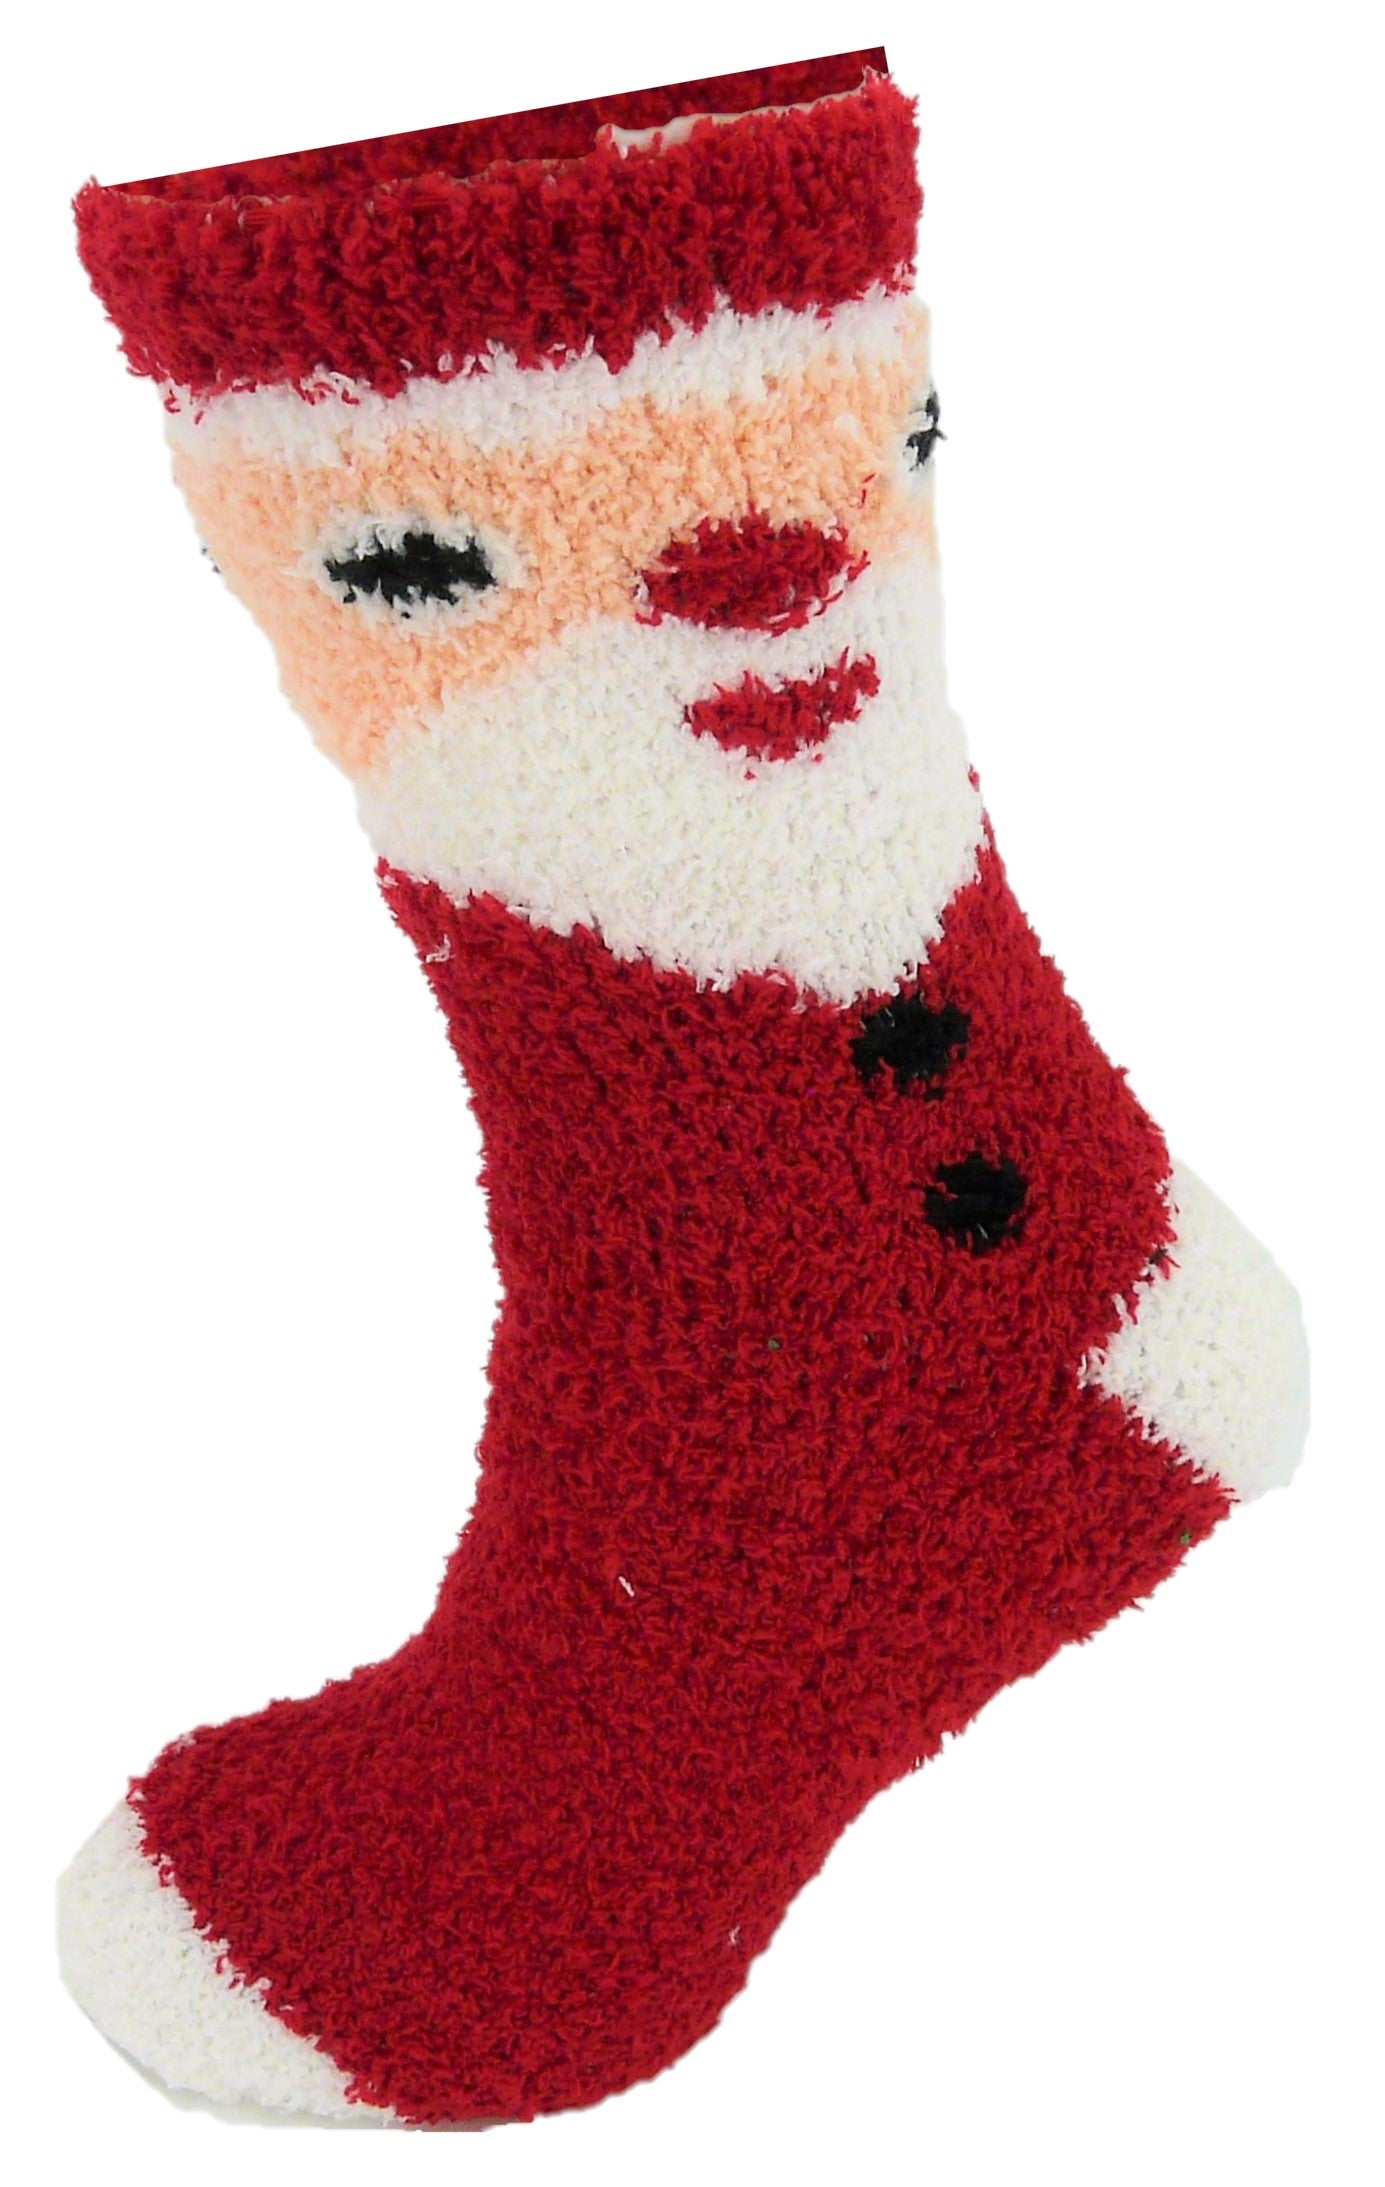 Ladies 6 pack Fluffy Christmas Co-Zees Socks with Gift Bow